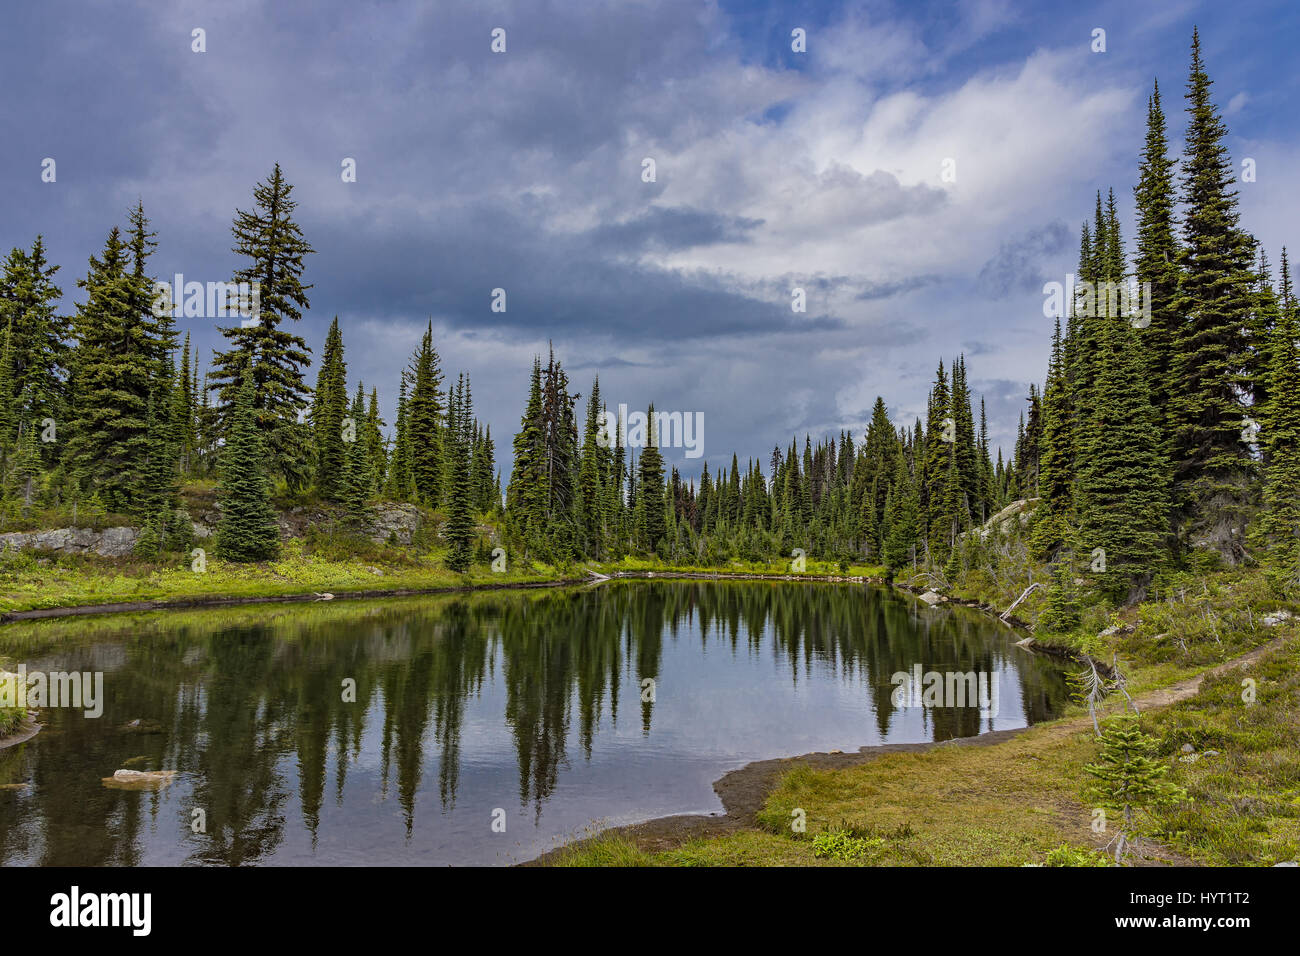 A view of an alpine lake in Revelstoke National Park British Columbia Canada Stock Photo